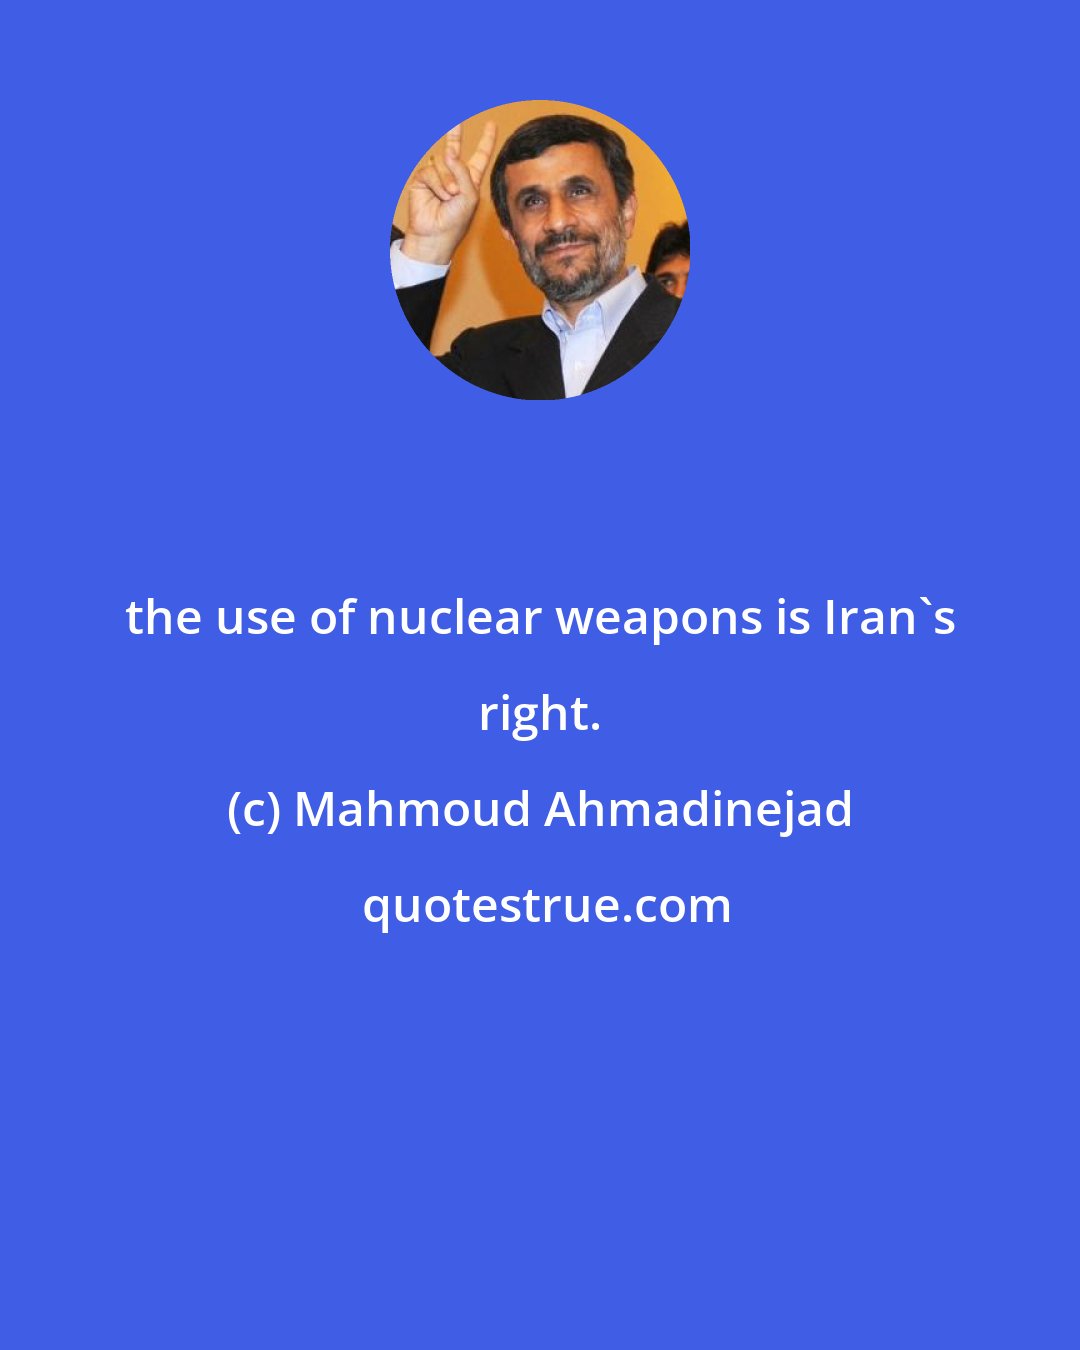 Mahmoud Ahmadinejad: the use of nuclear weapons is Iran's right.